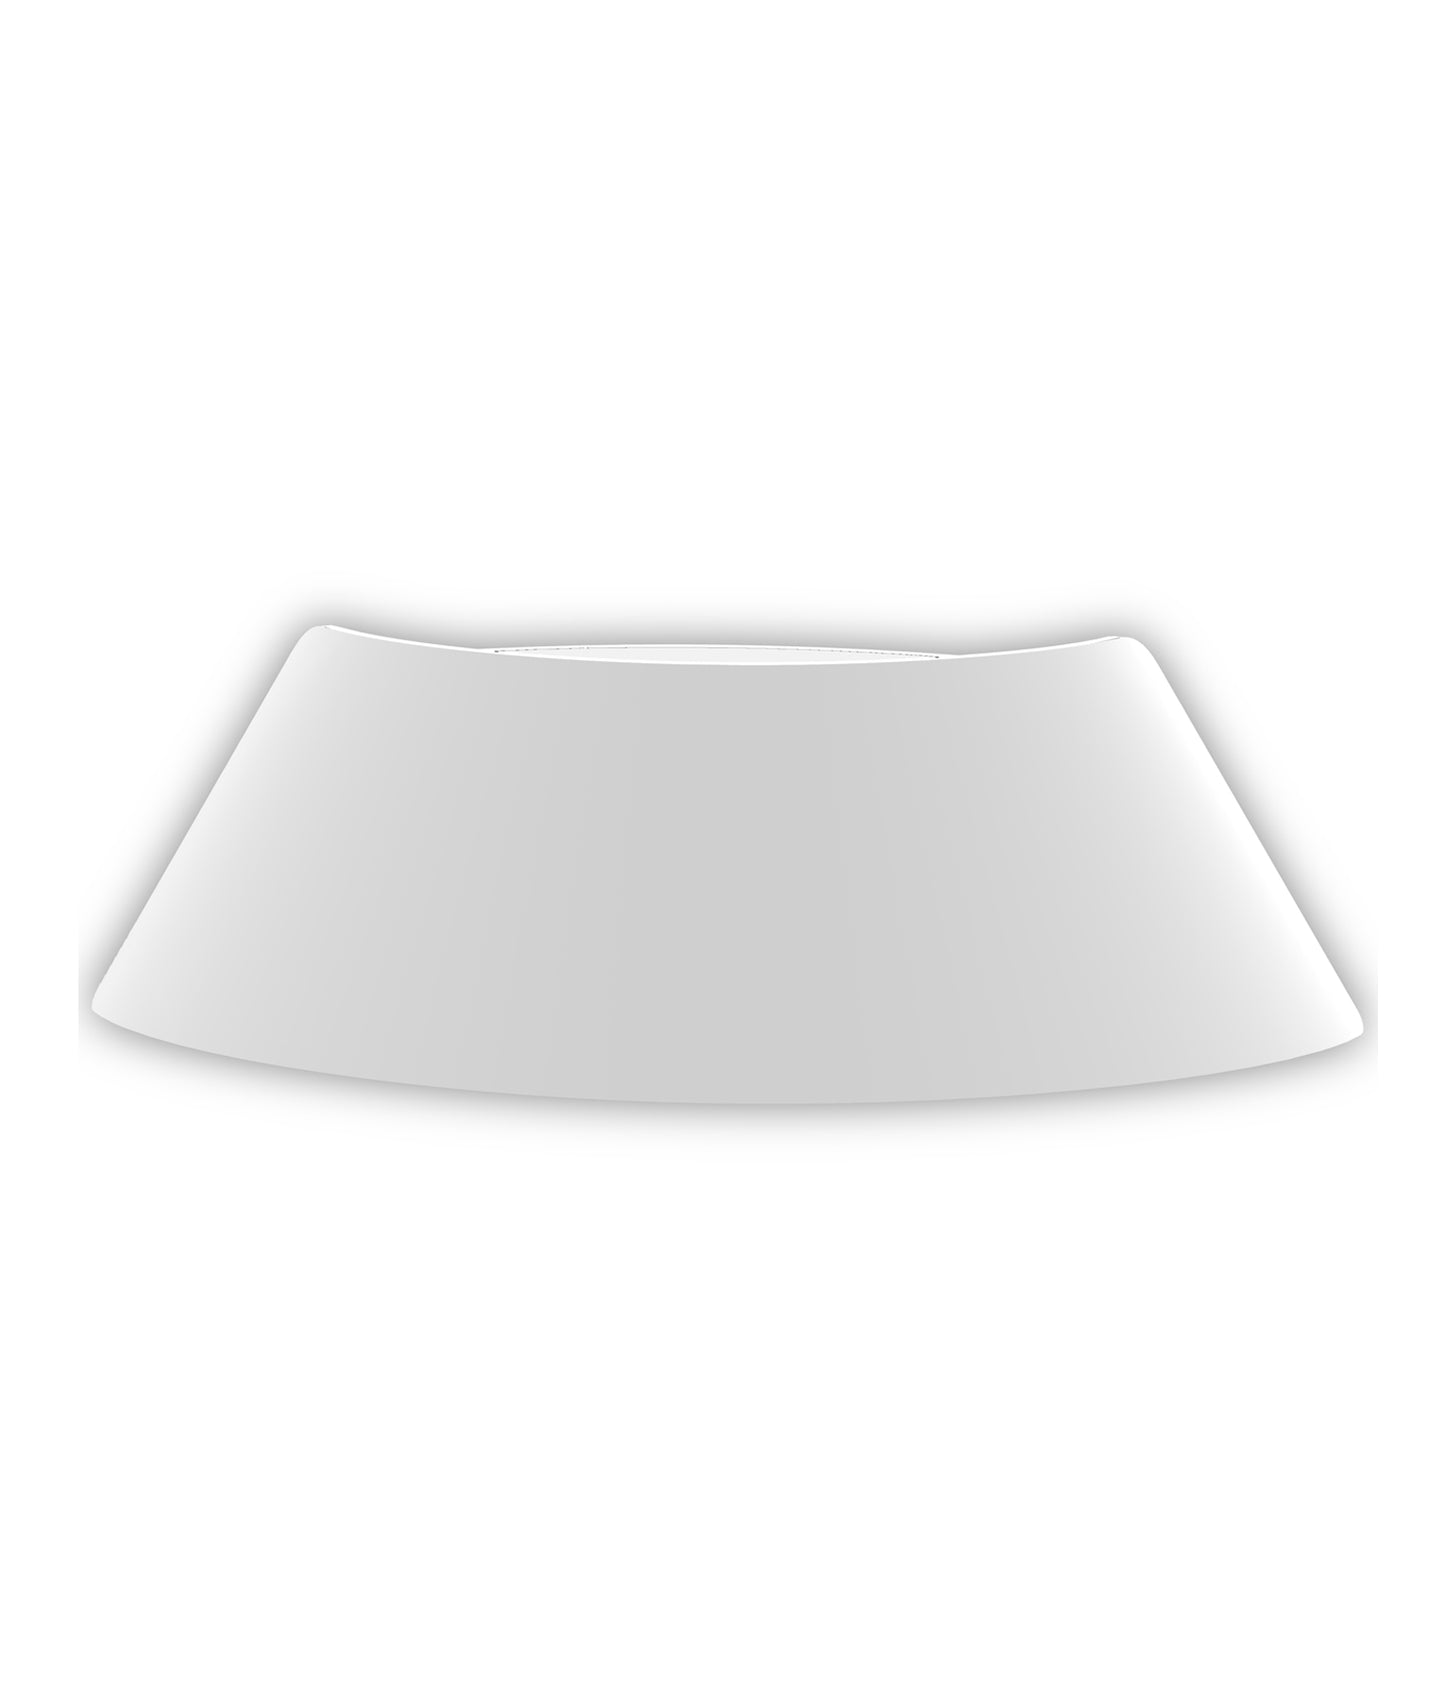 ATEN: LED Exterior Surface Mounted Curved Up/Down Wall Lights IP65